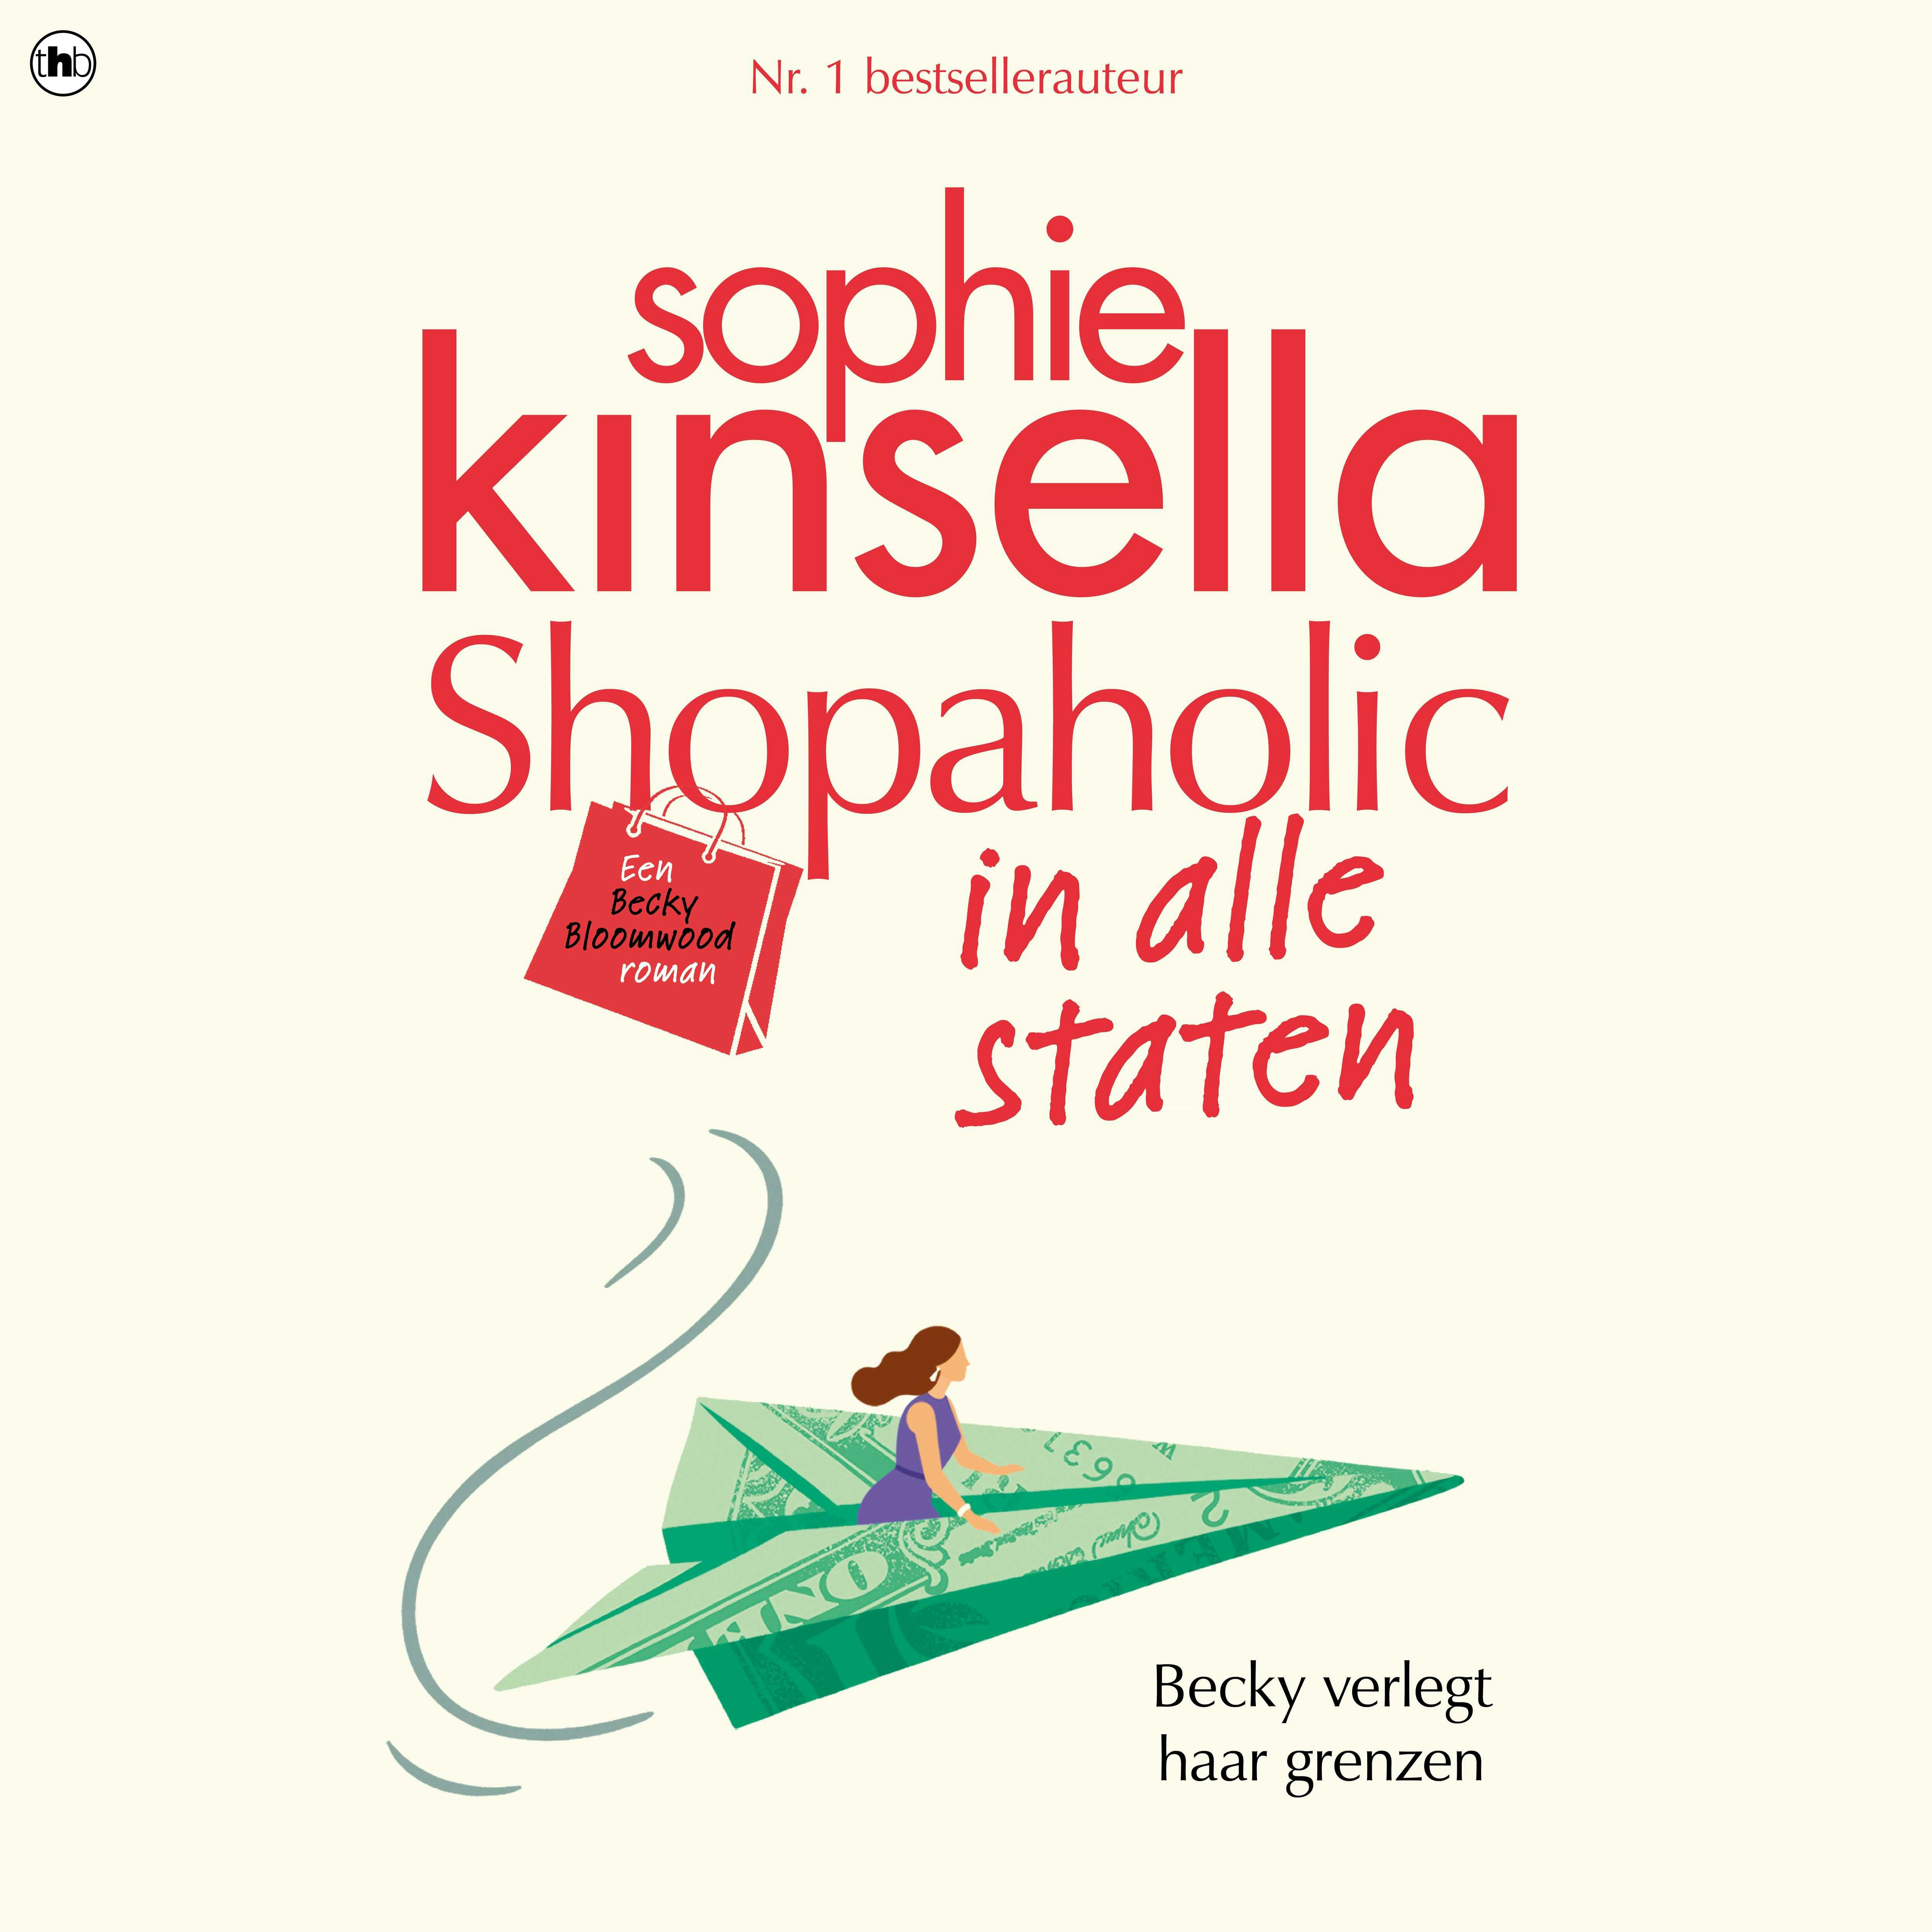 Shopaholic in alle staten: Shopaholic 2 - undefined